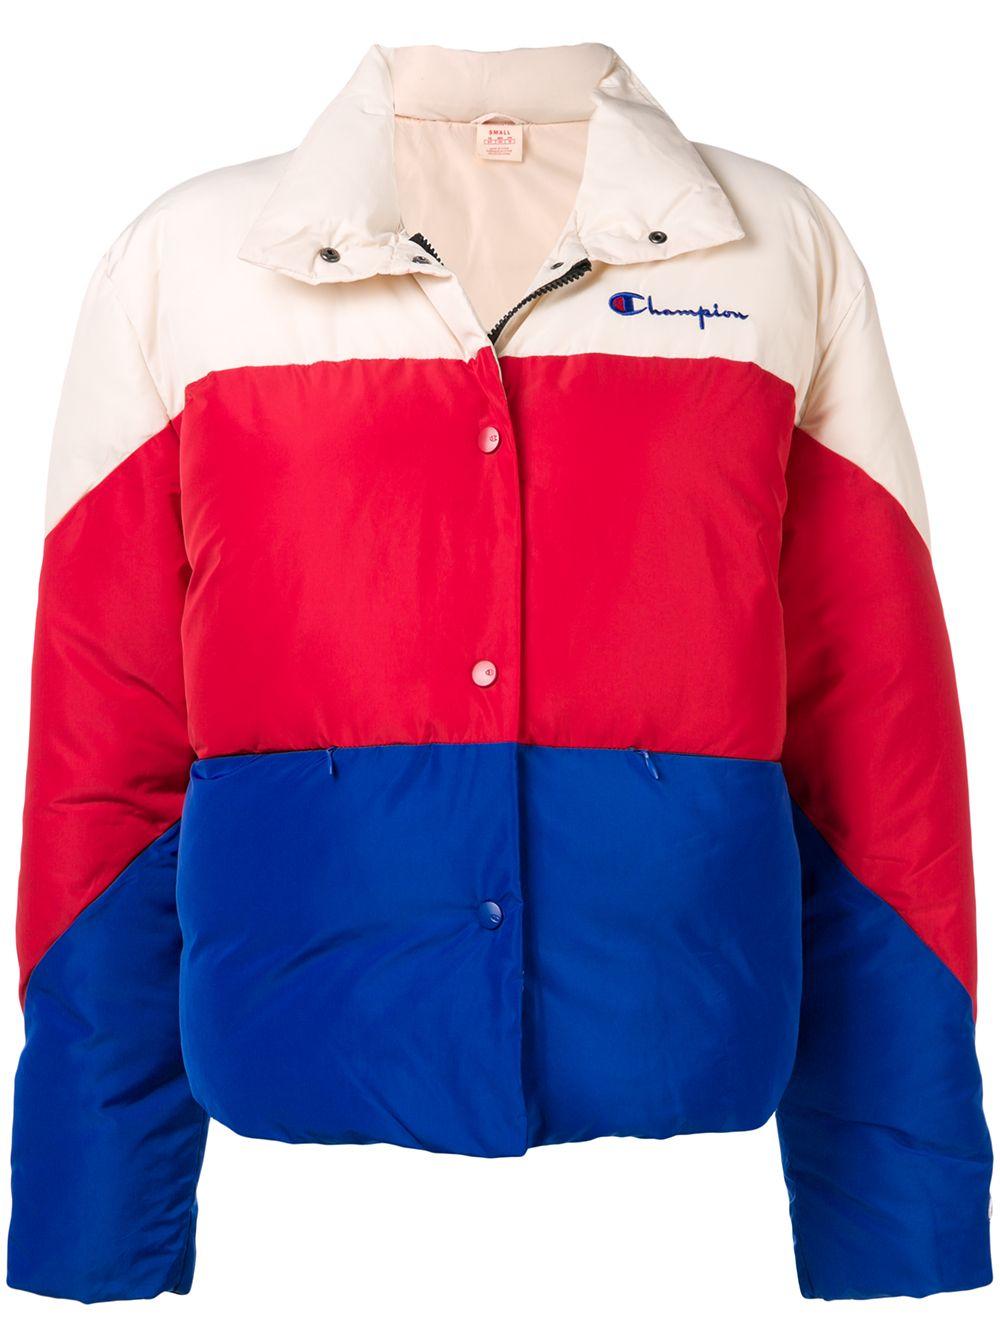 Red White And Blue Champion Jacket Store, 60% OFF | www.emanagreen.com